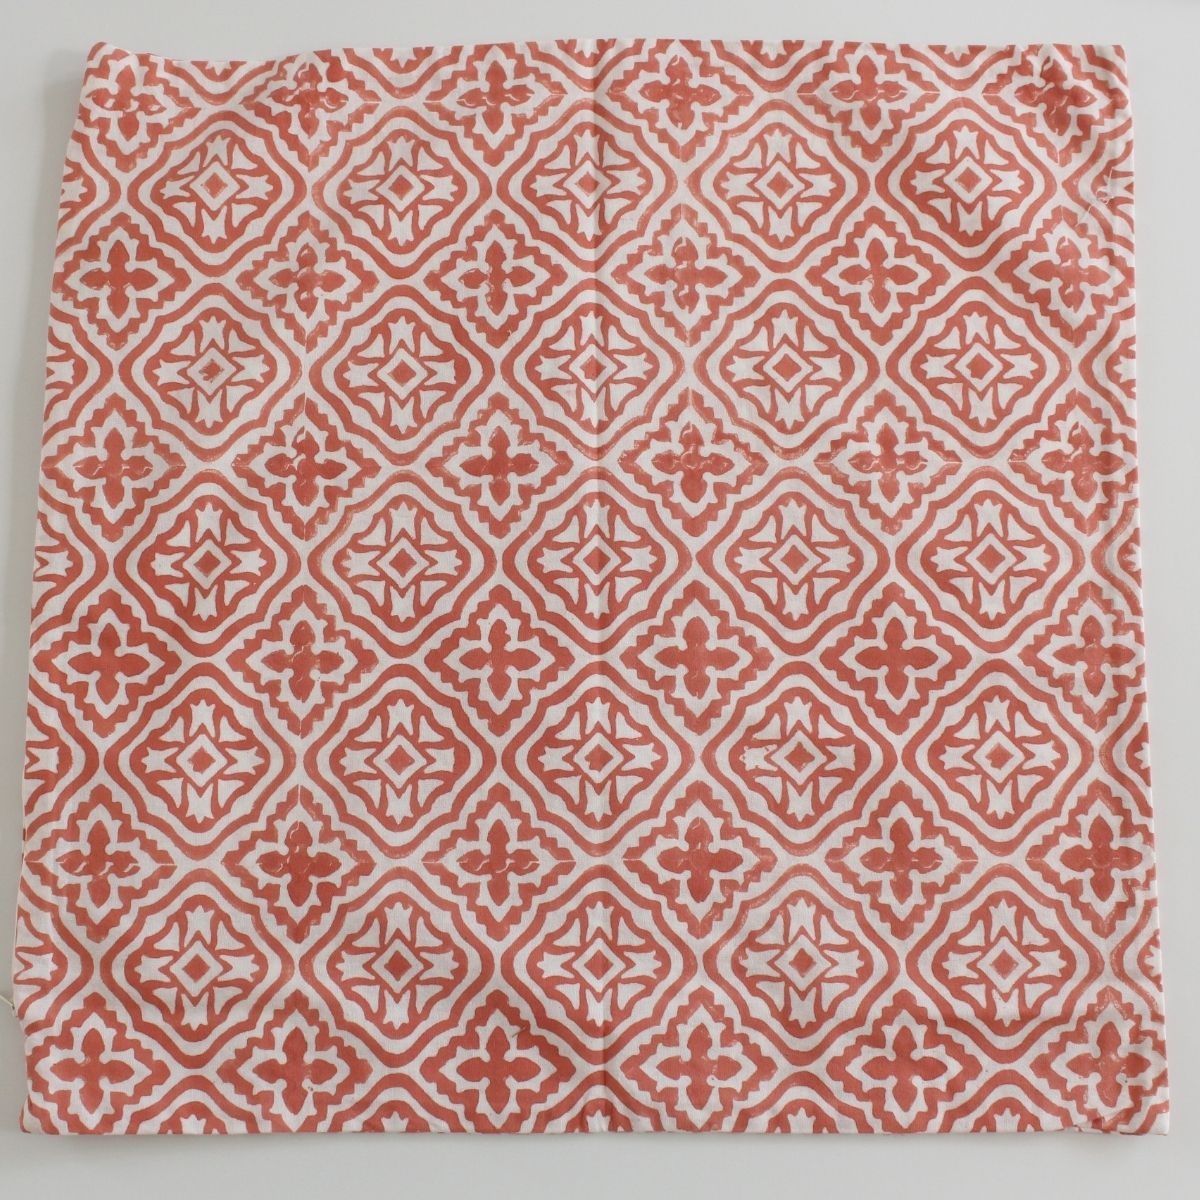 Pink cross flower cushion cover